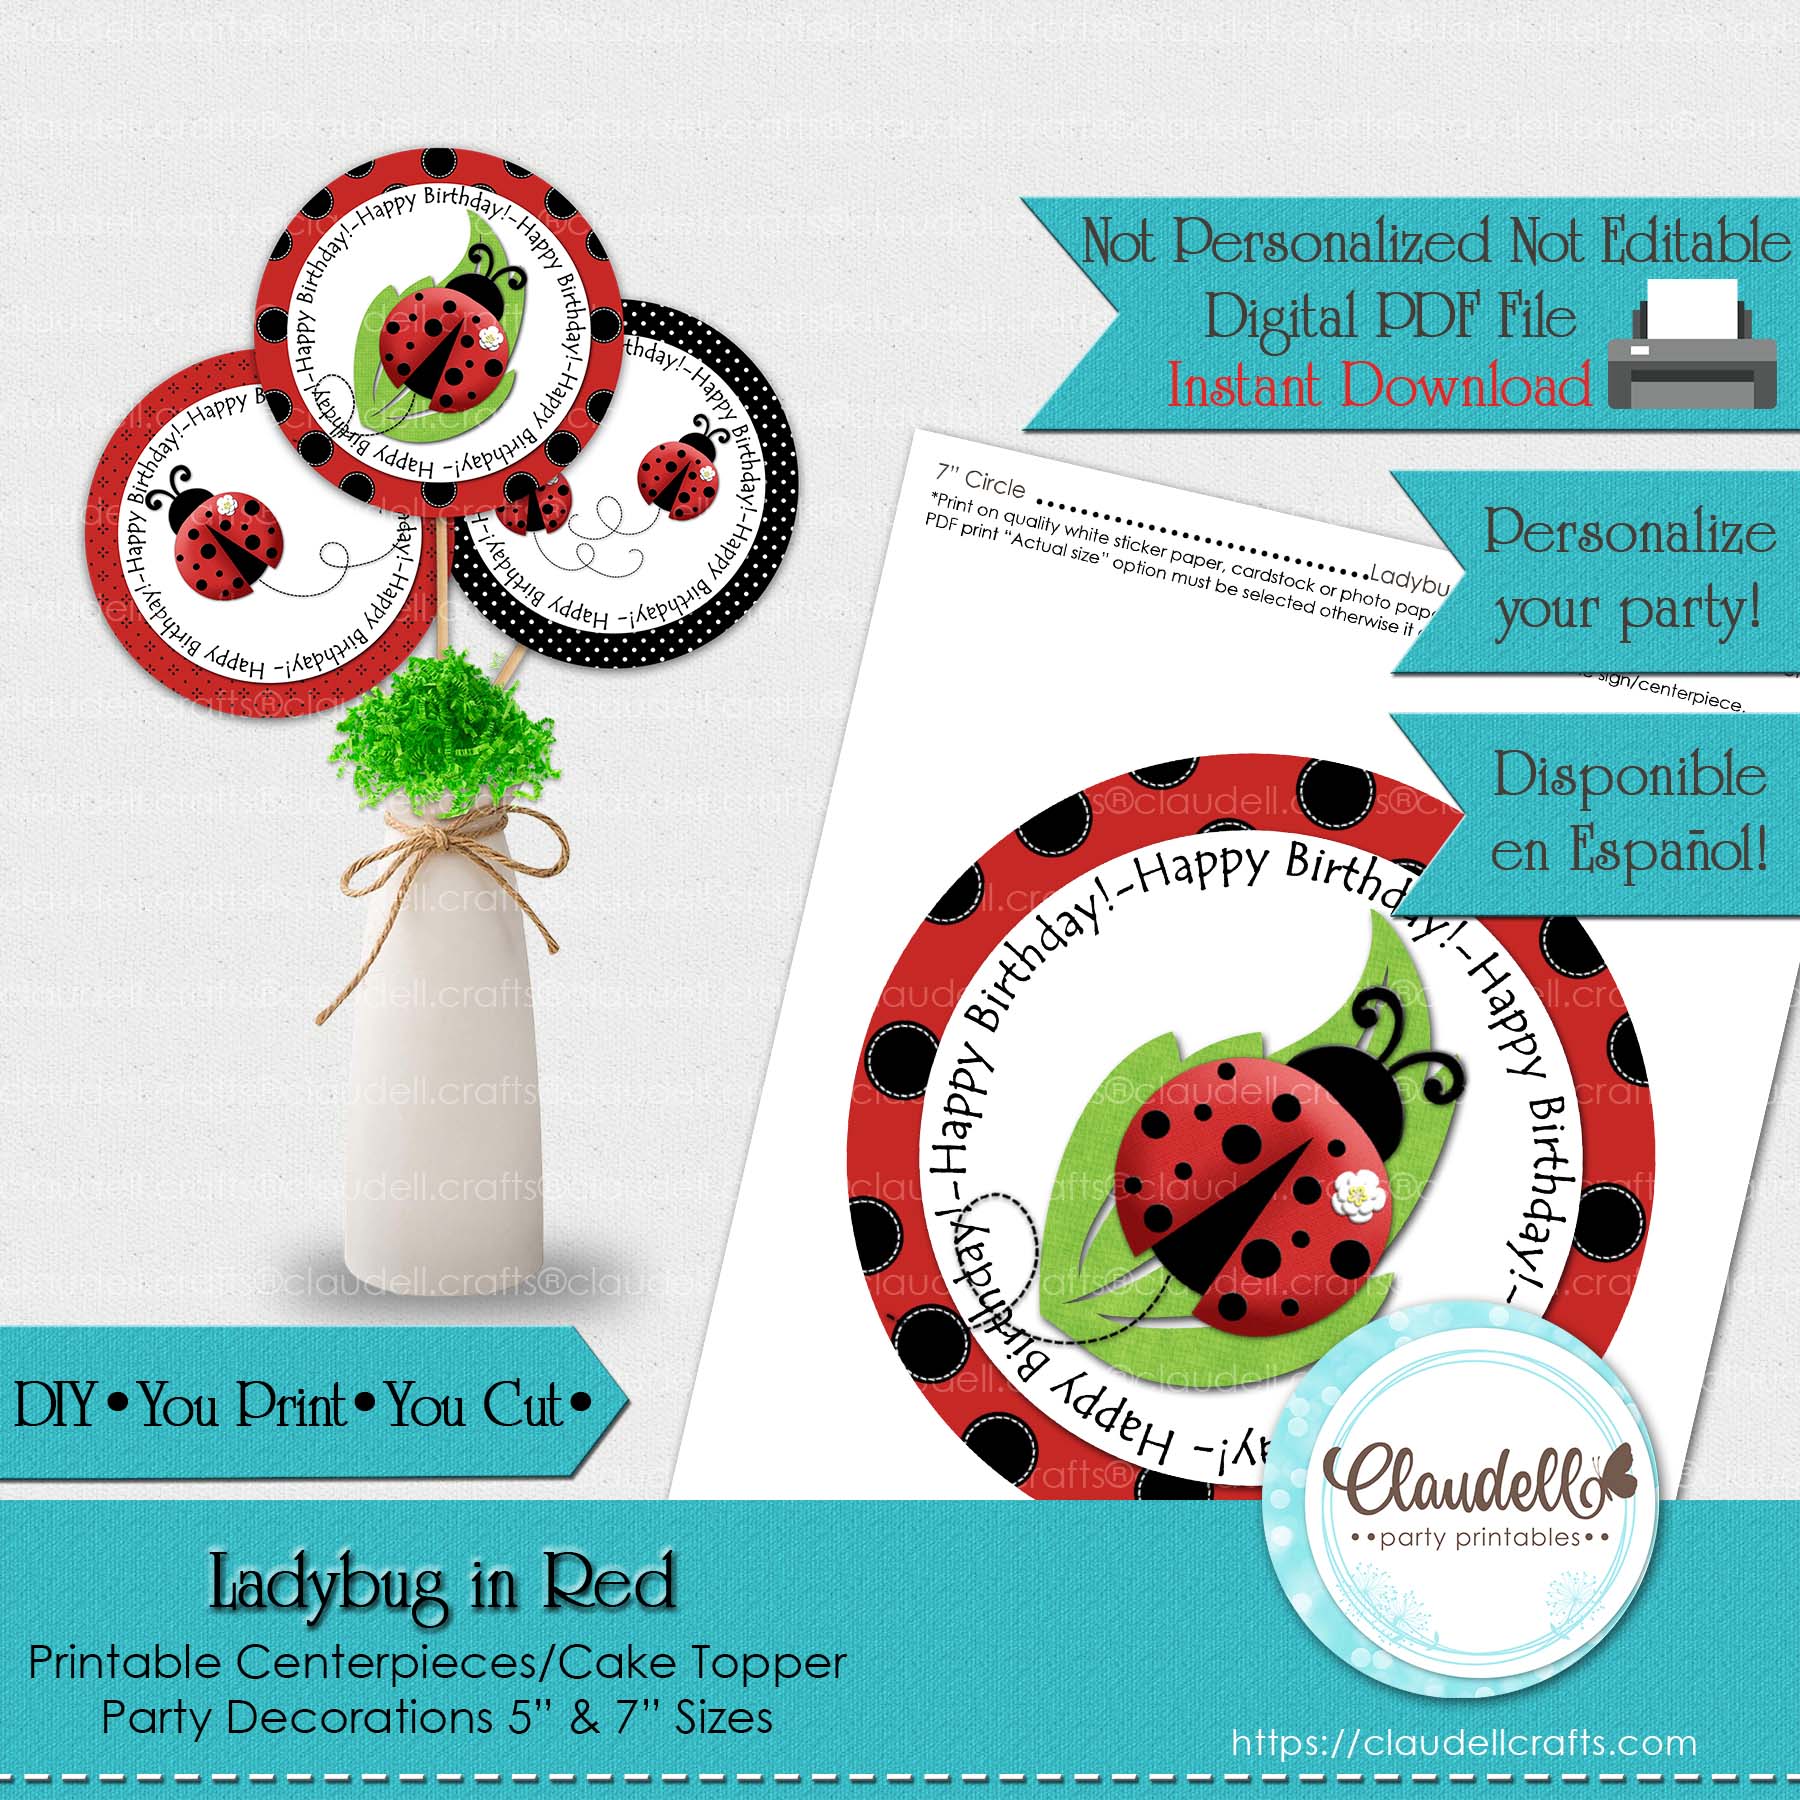 Ladybug in Red Round Centerpieces, Ladybug Birthday Centerpieces, Garden Party Decoration, Ladybug One Birthday Party, Ladybug Party Favors/Digital File Only